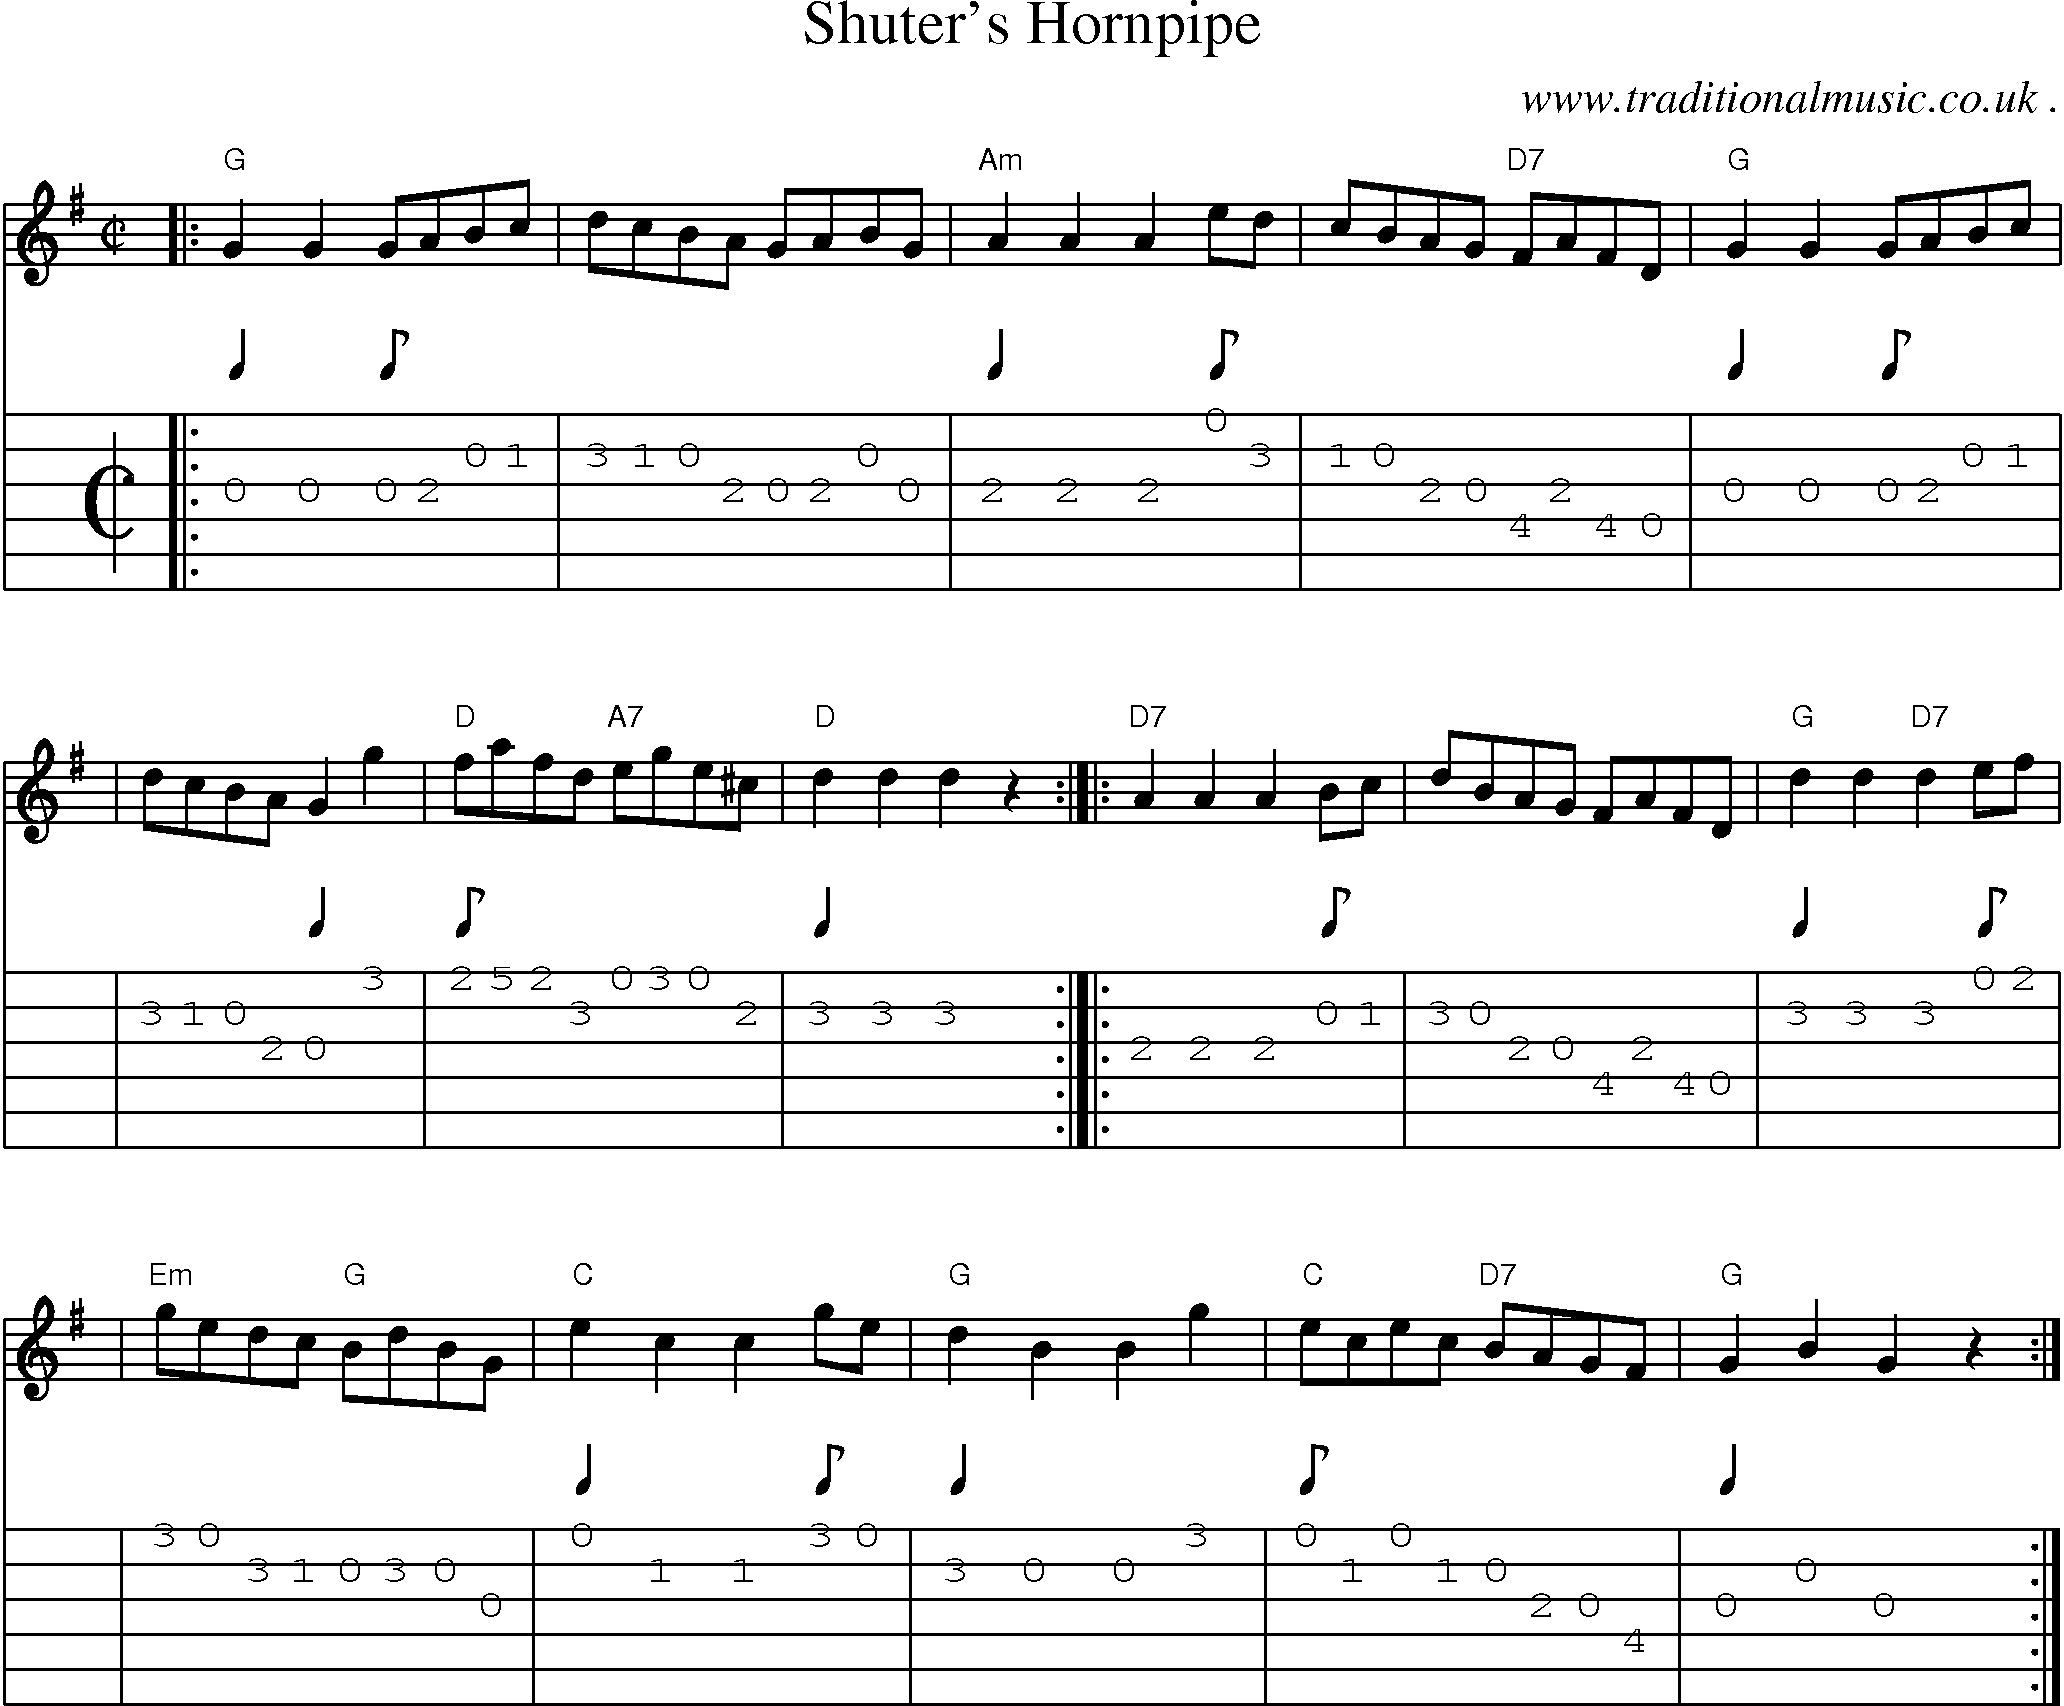 Sheet-music  score, Chords and Guitar Tabs for Shuters Hornpipe